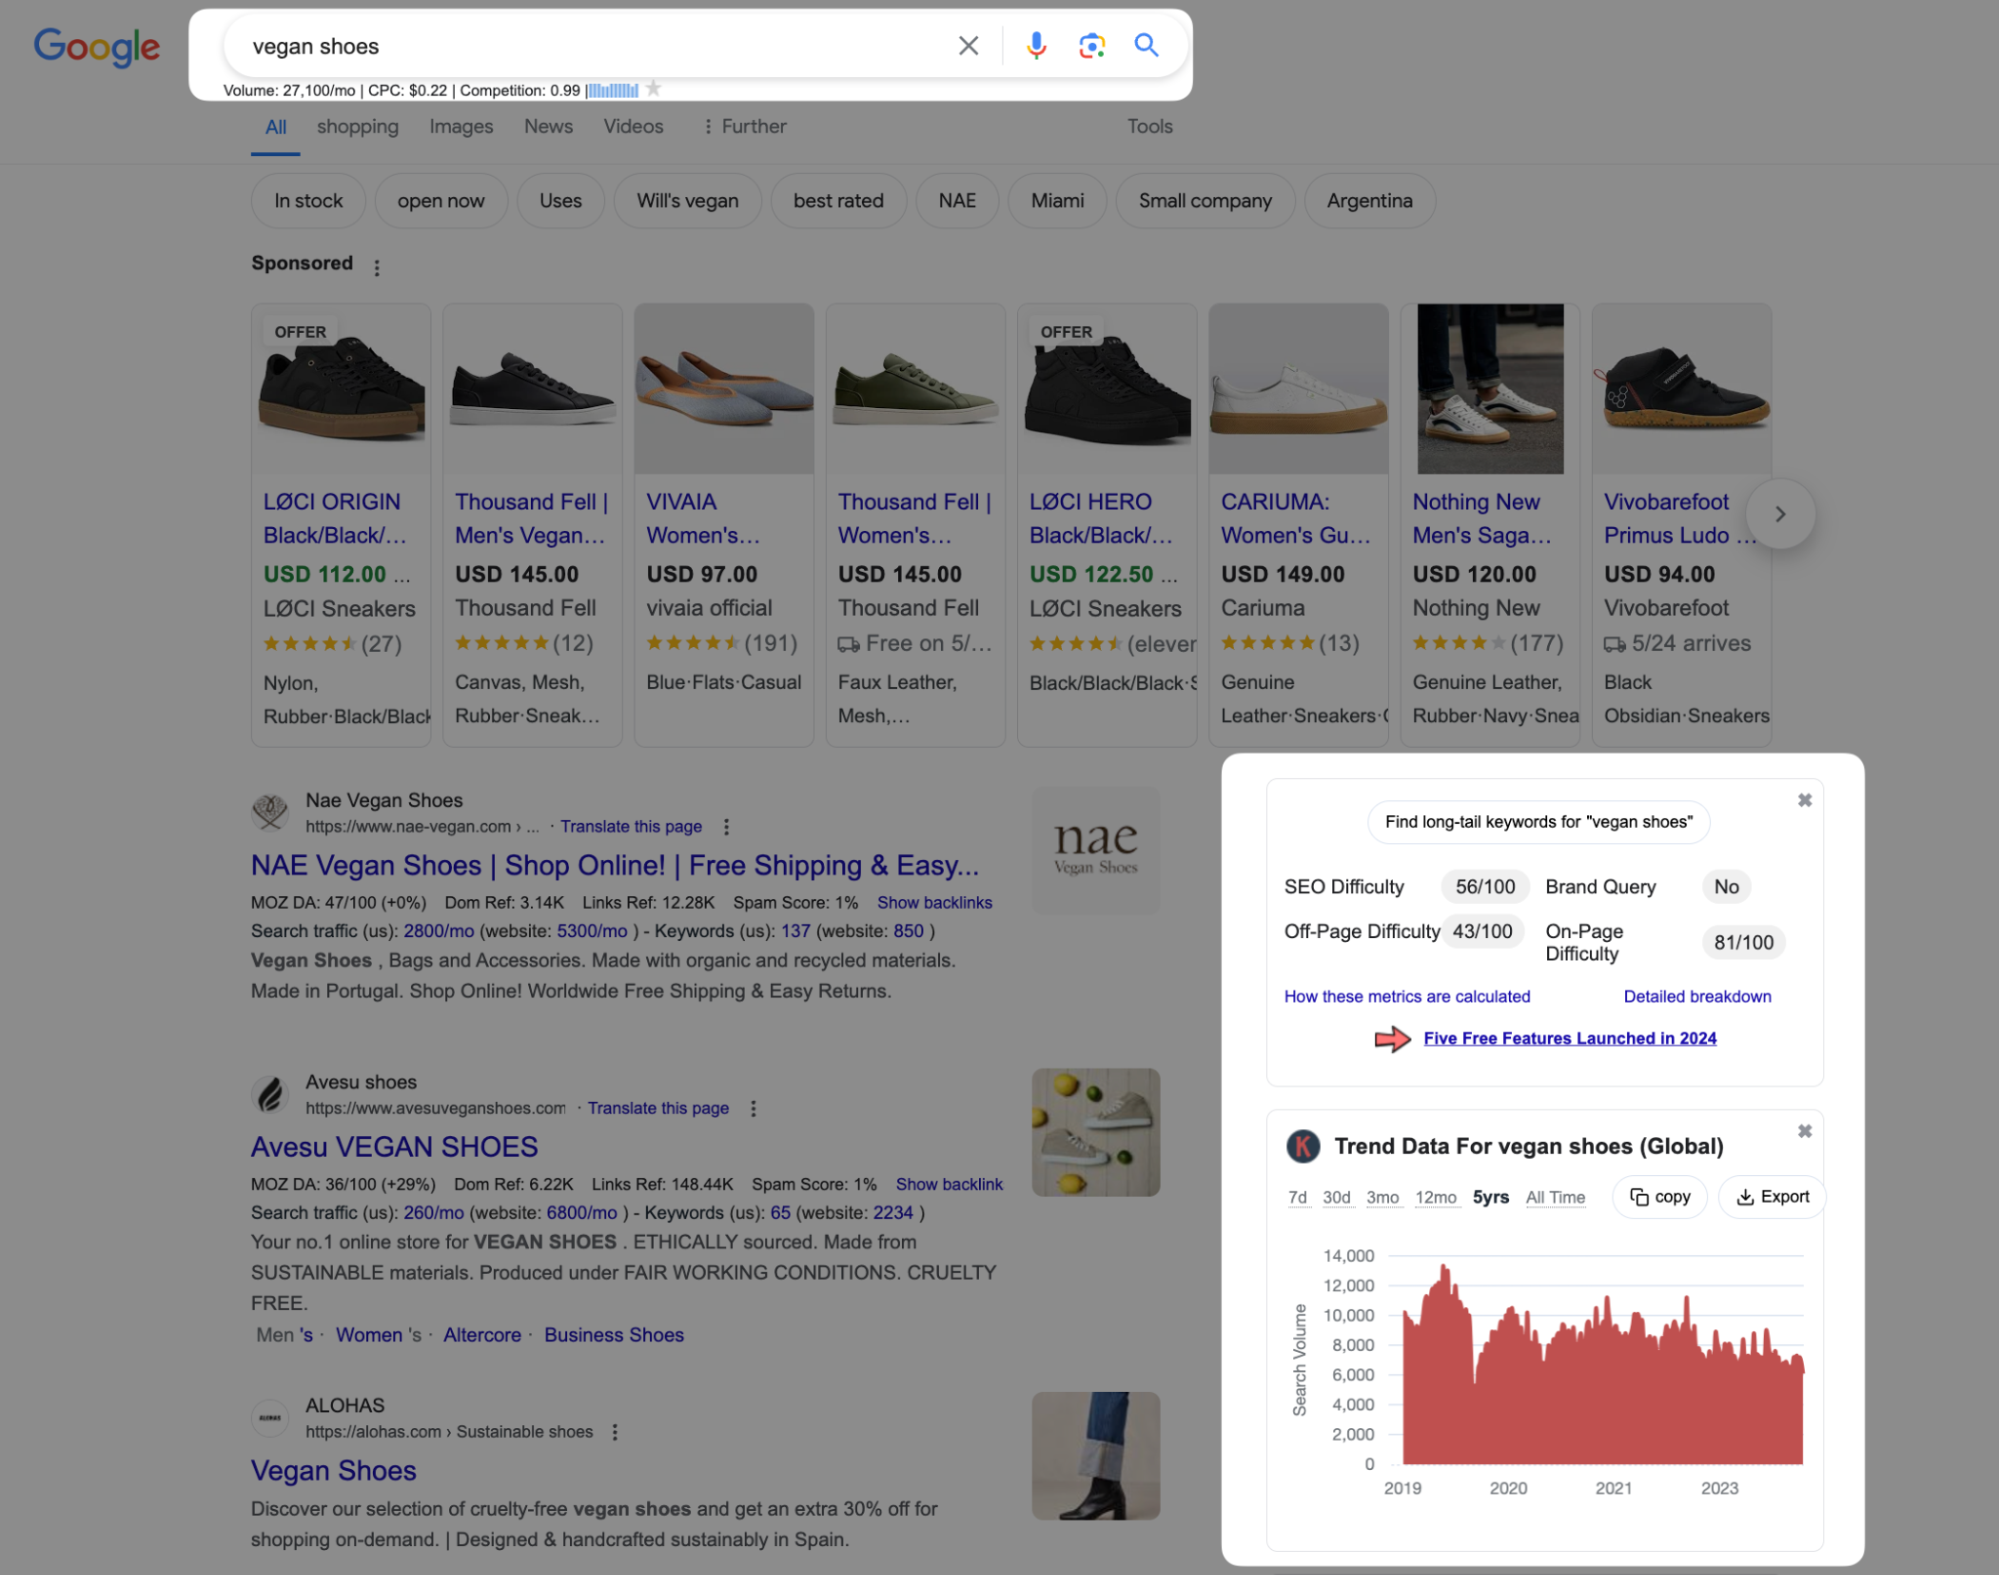 Google search for "vegan shoes" with product listings, trend data, and keyword difficulty.